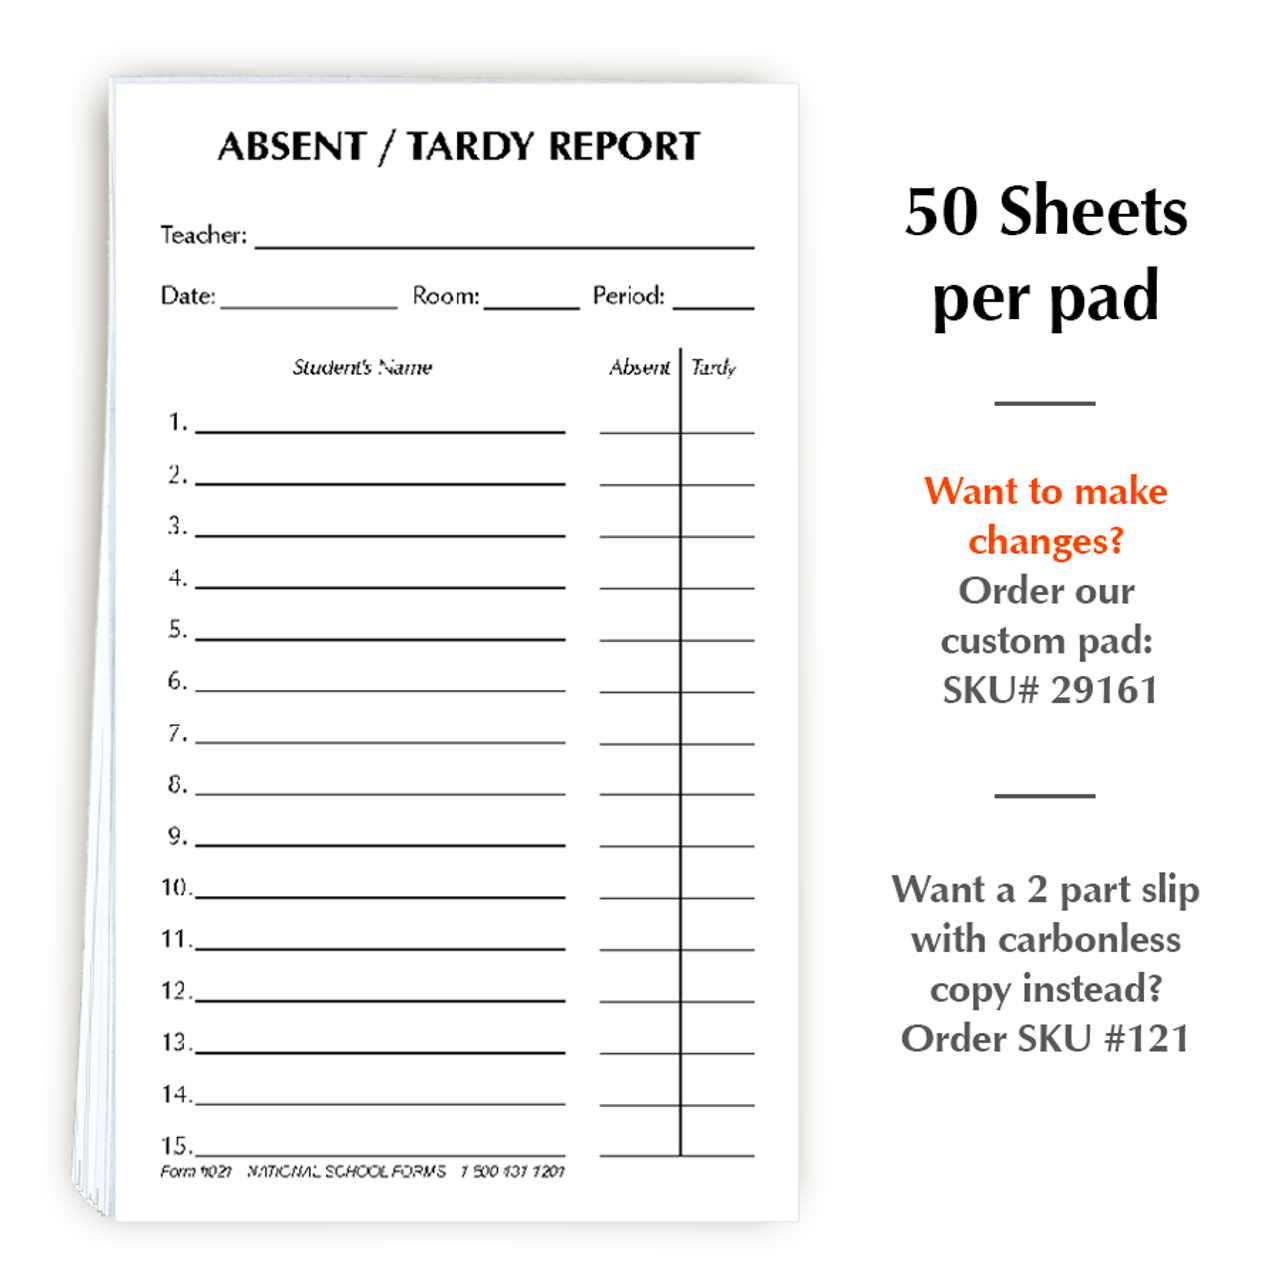 Absent-Tardy Report Pad - White - 50 Sheets per pad